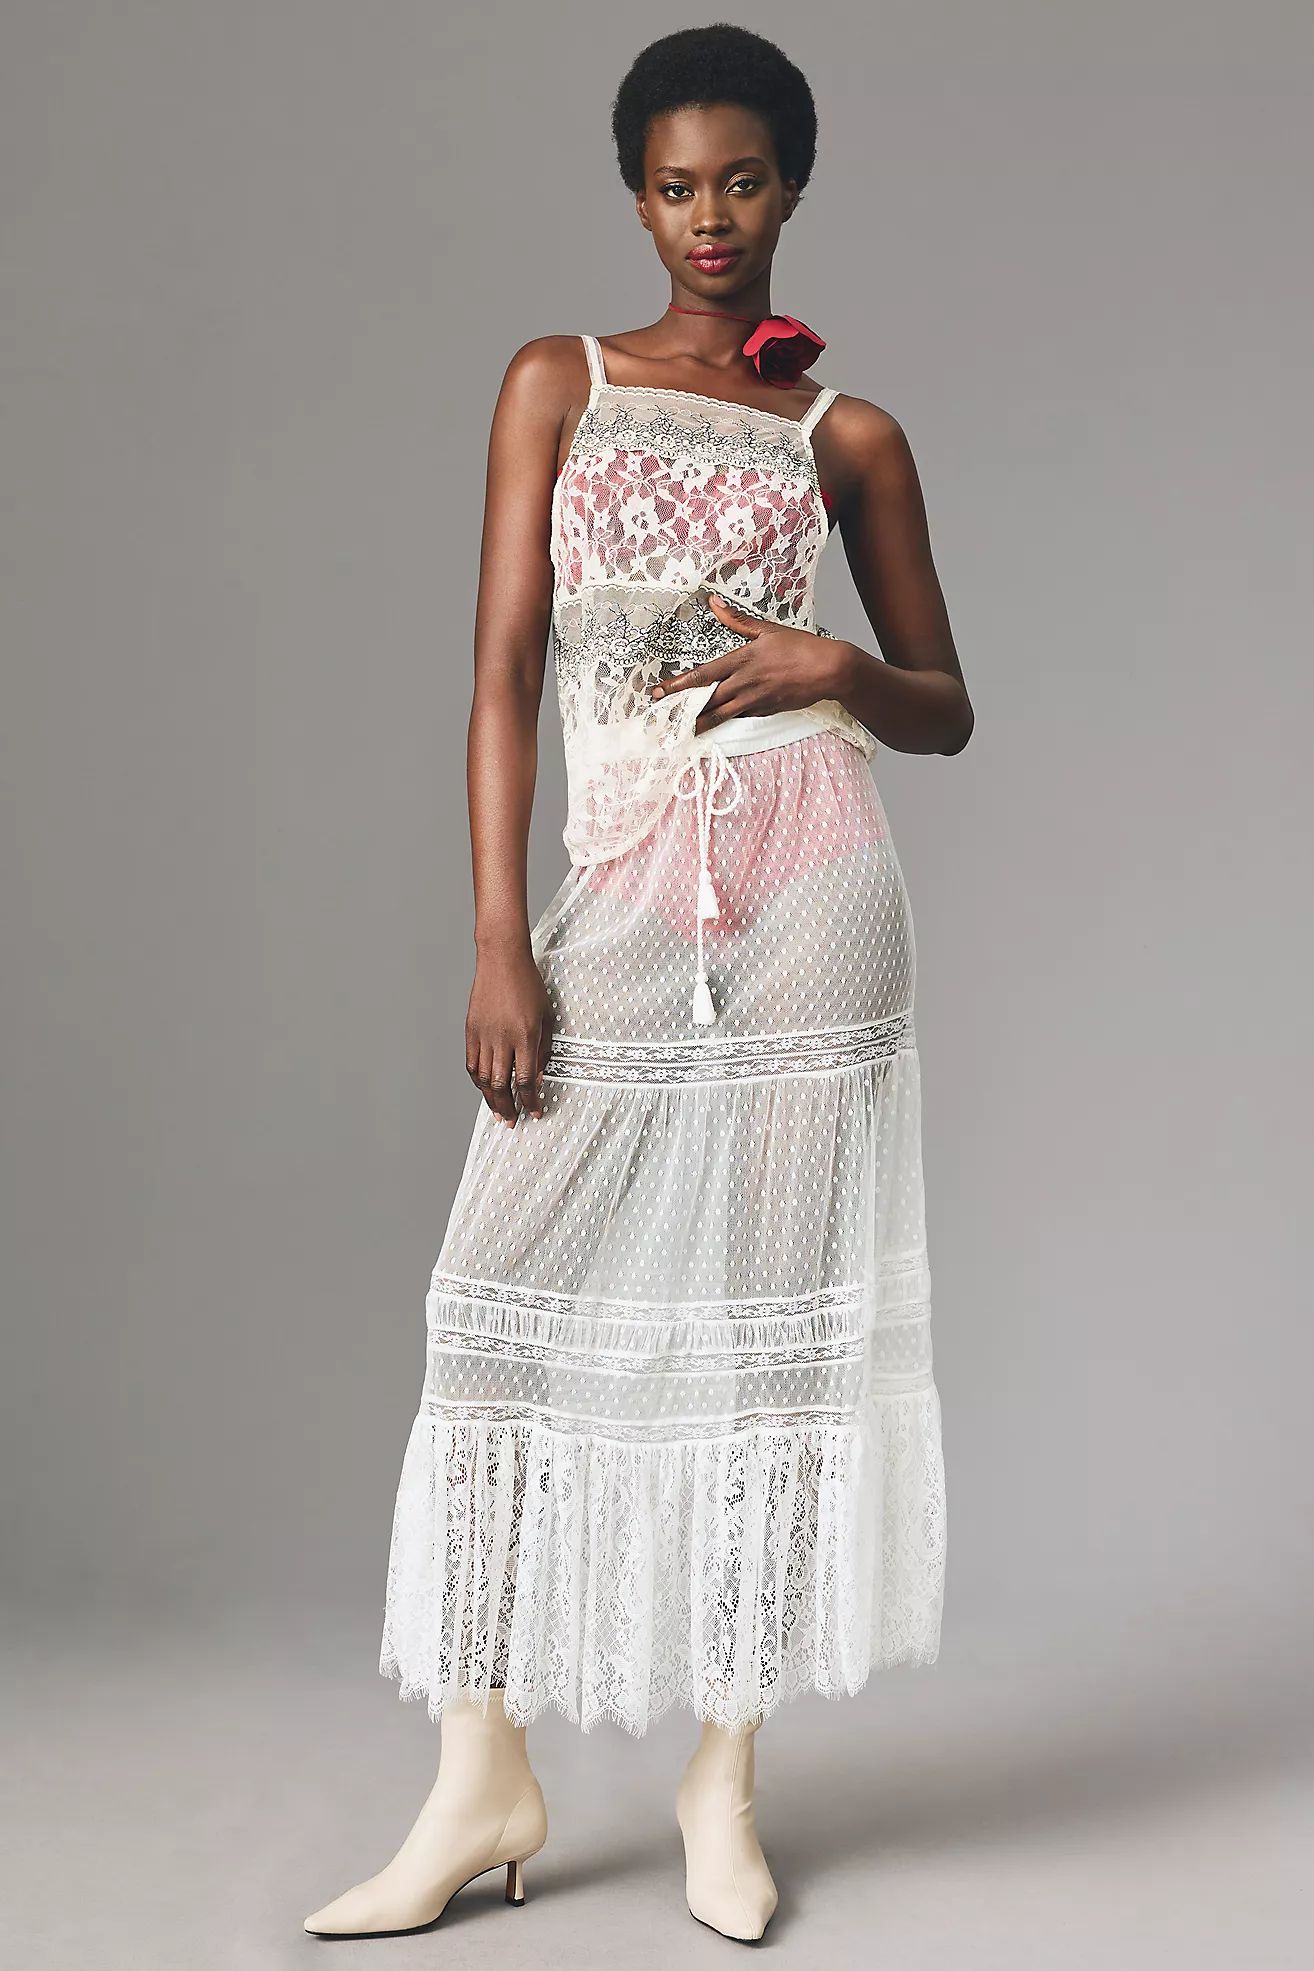 By Anthropologie Sheer Lace Maxi Skirt | Anthropologie (US)